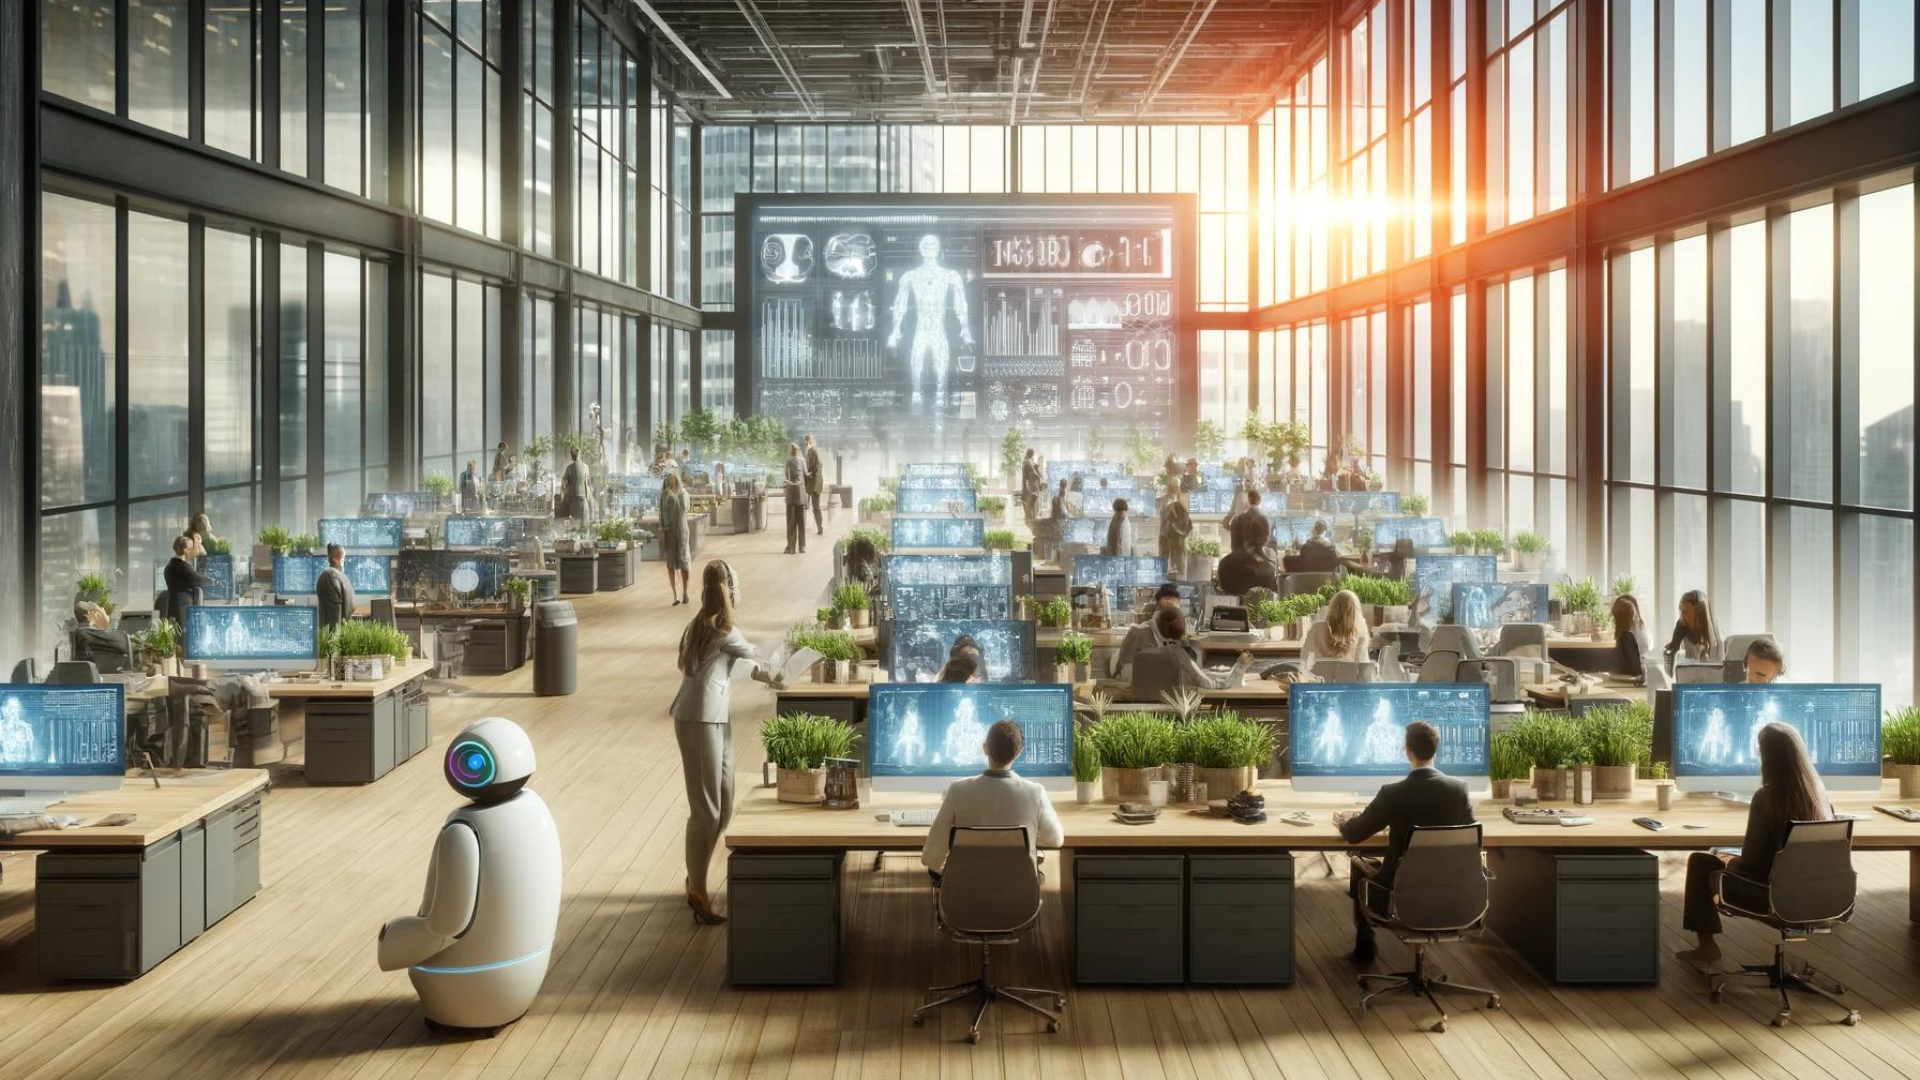 Large, bright, glassed-in virtual open space with a robot and dozens of workers in front of computers